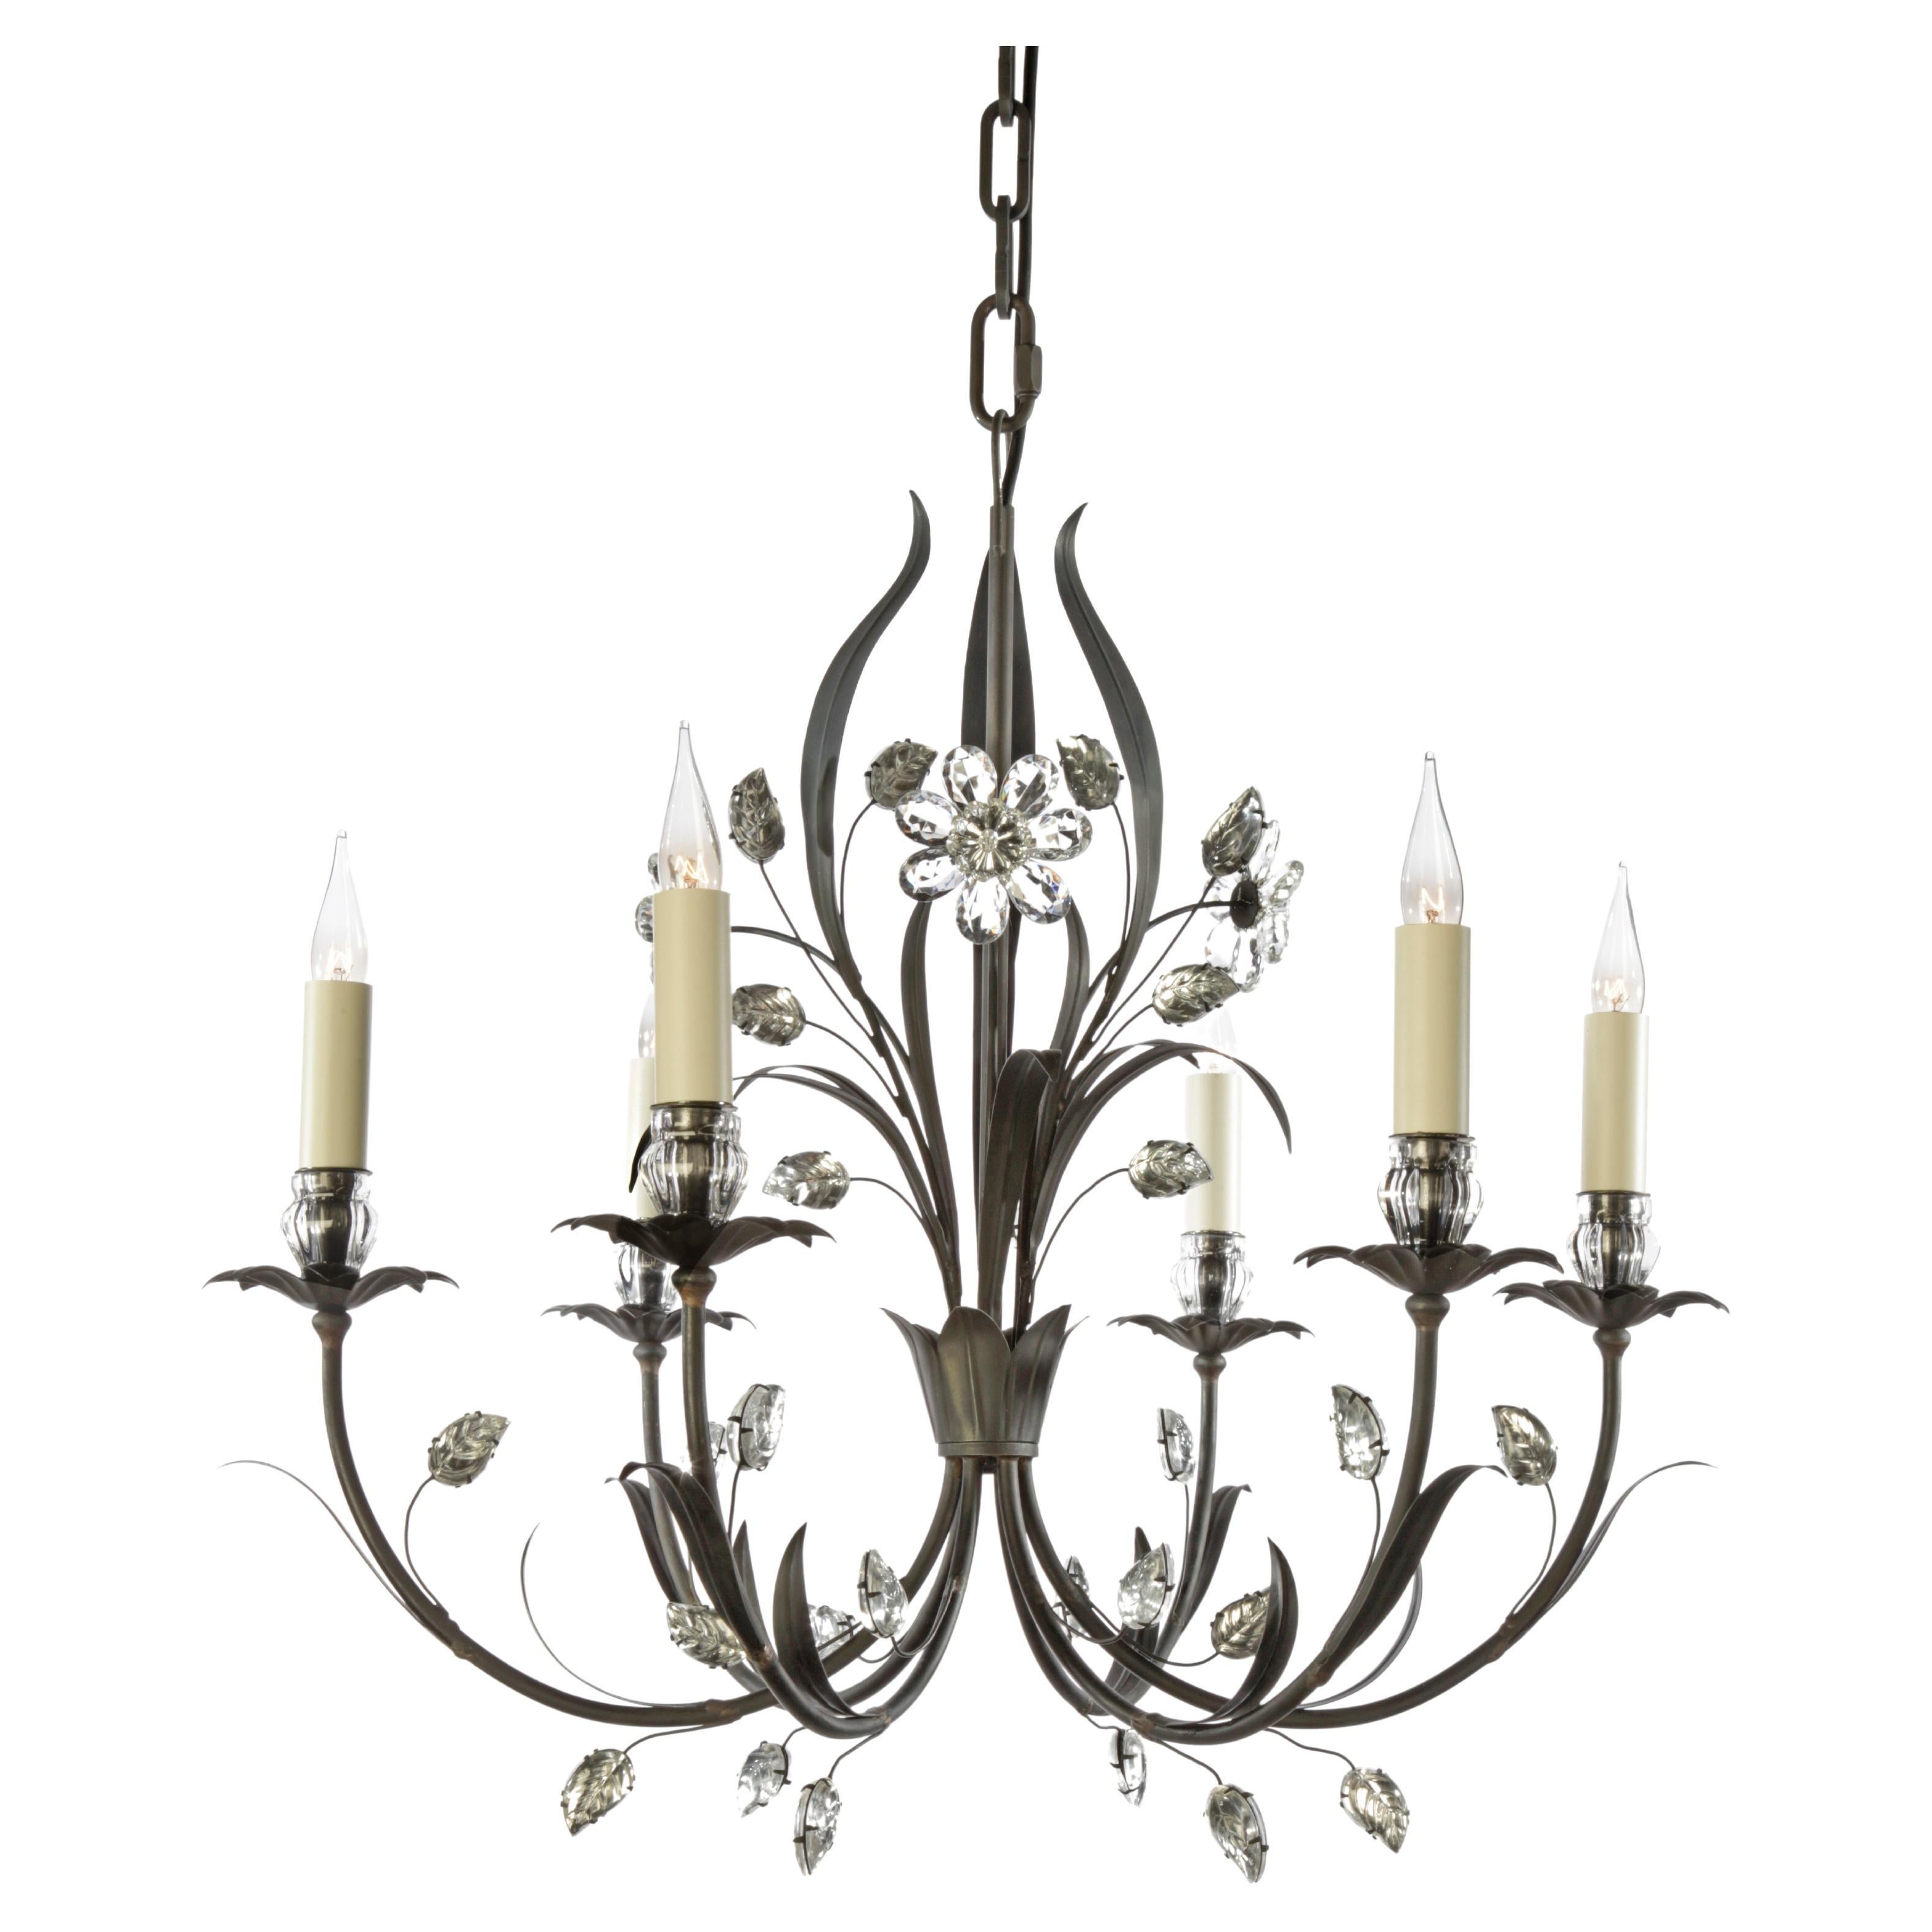 Certified Maison Bagues Chandelier, 6 Lights Iron & Crystal #00166 For Sale